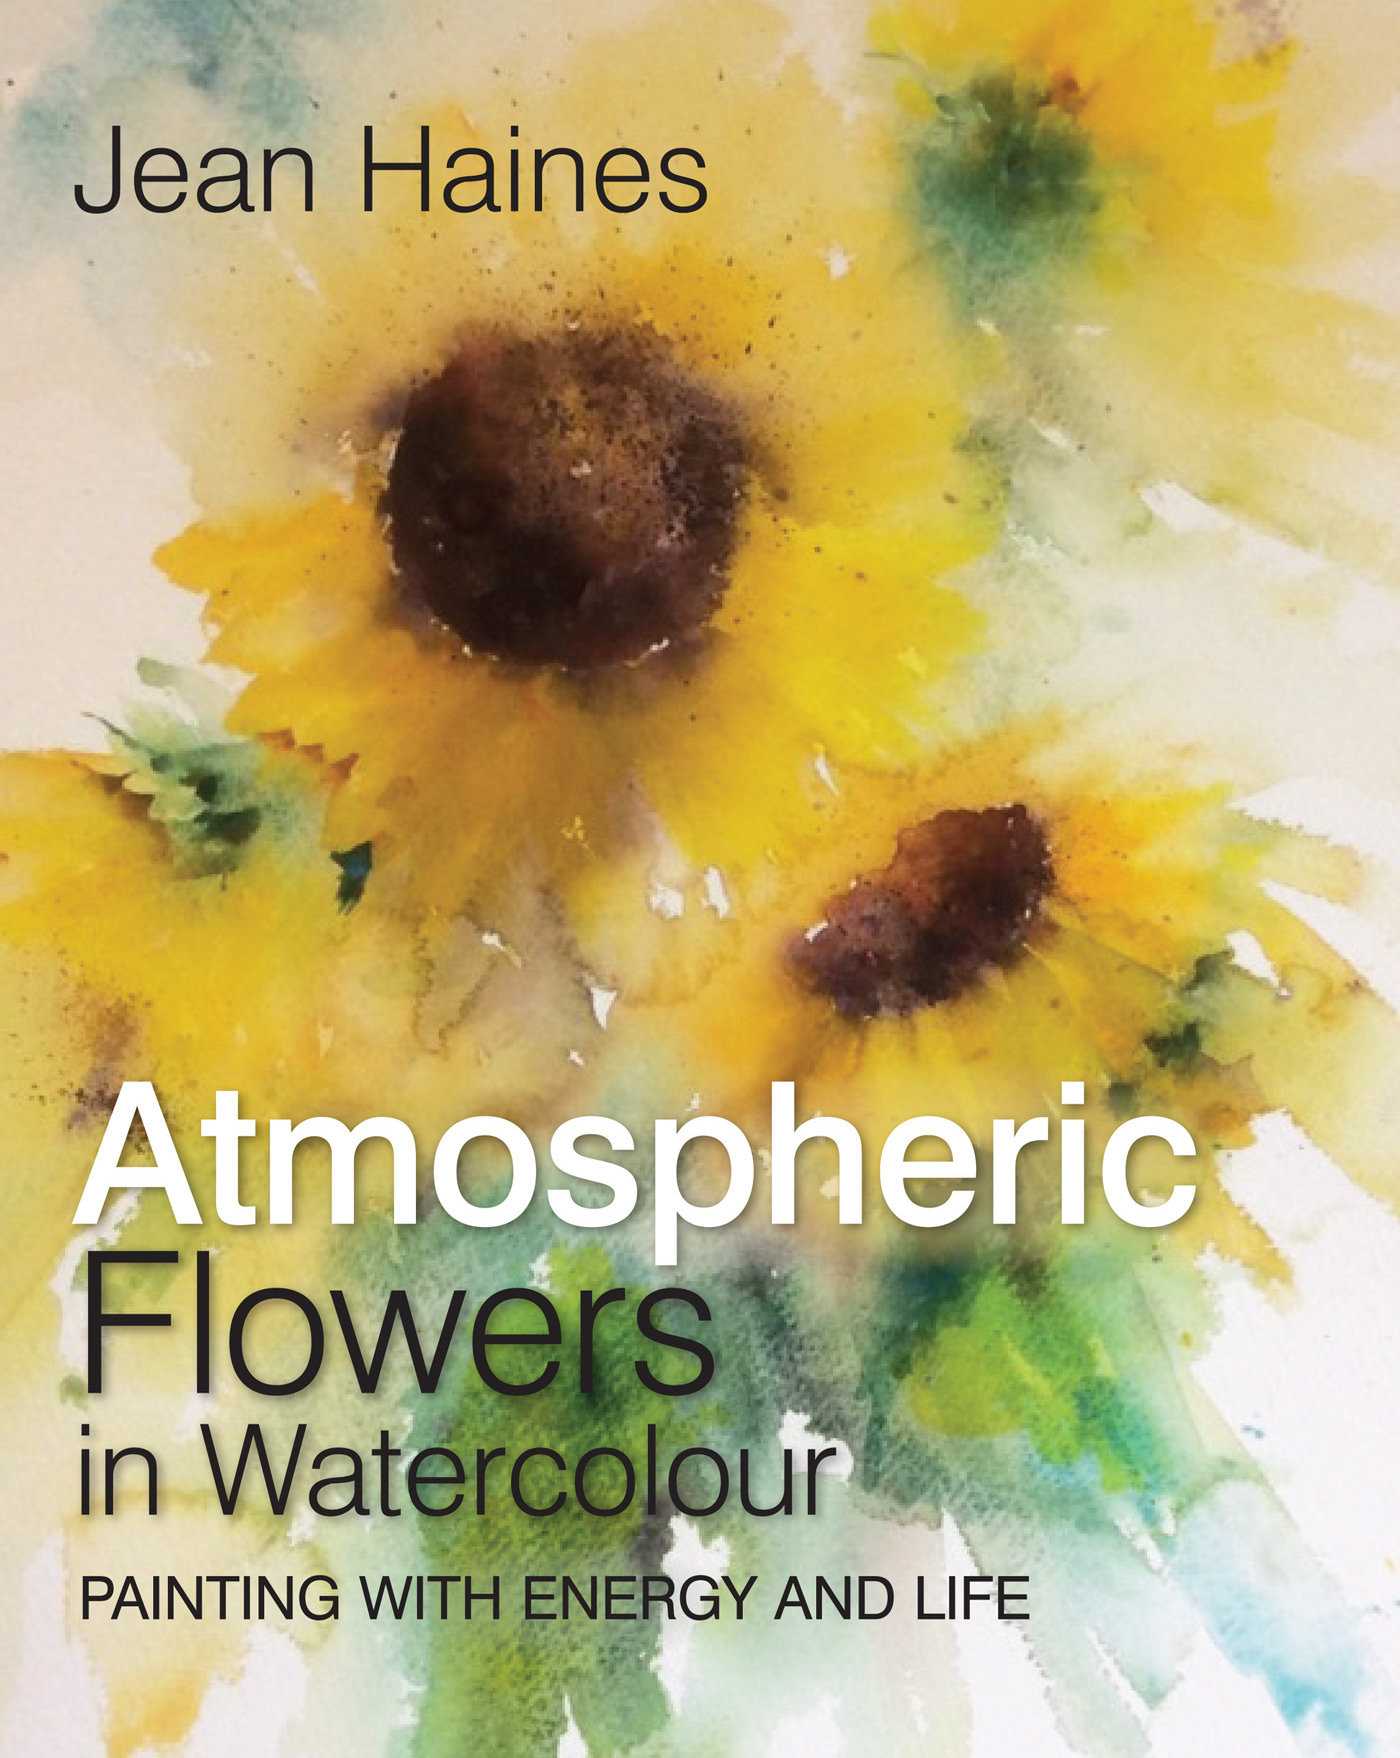 Jean Haines' Atmospheric Flowers In Watercolour (Hardcover Book)